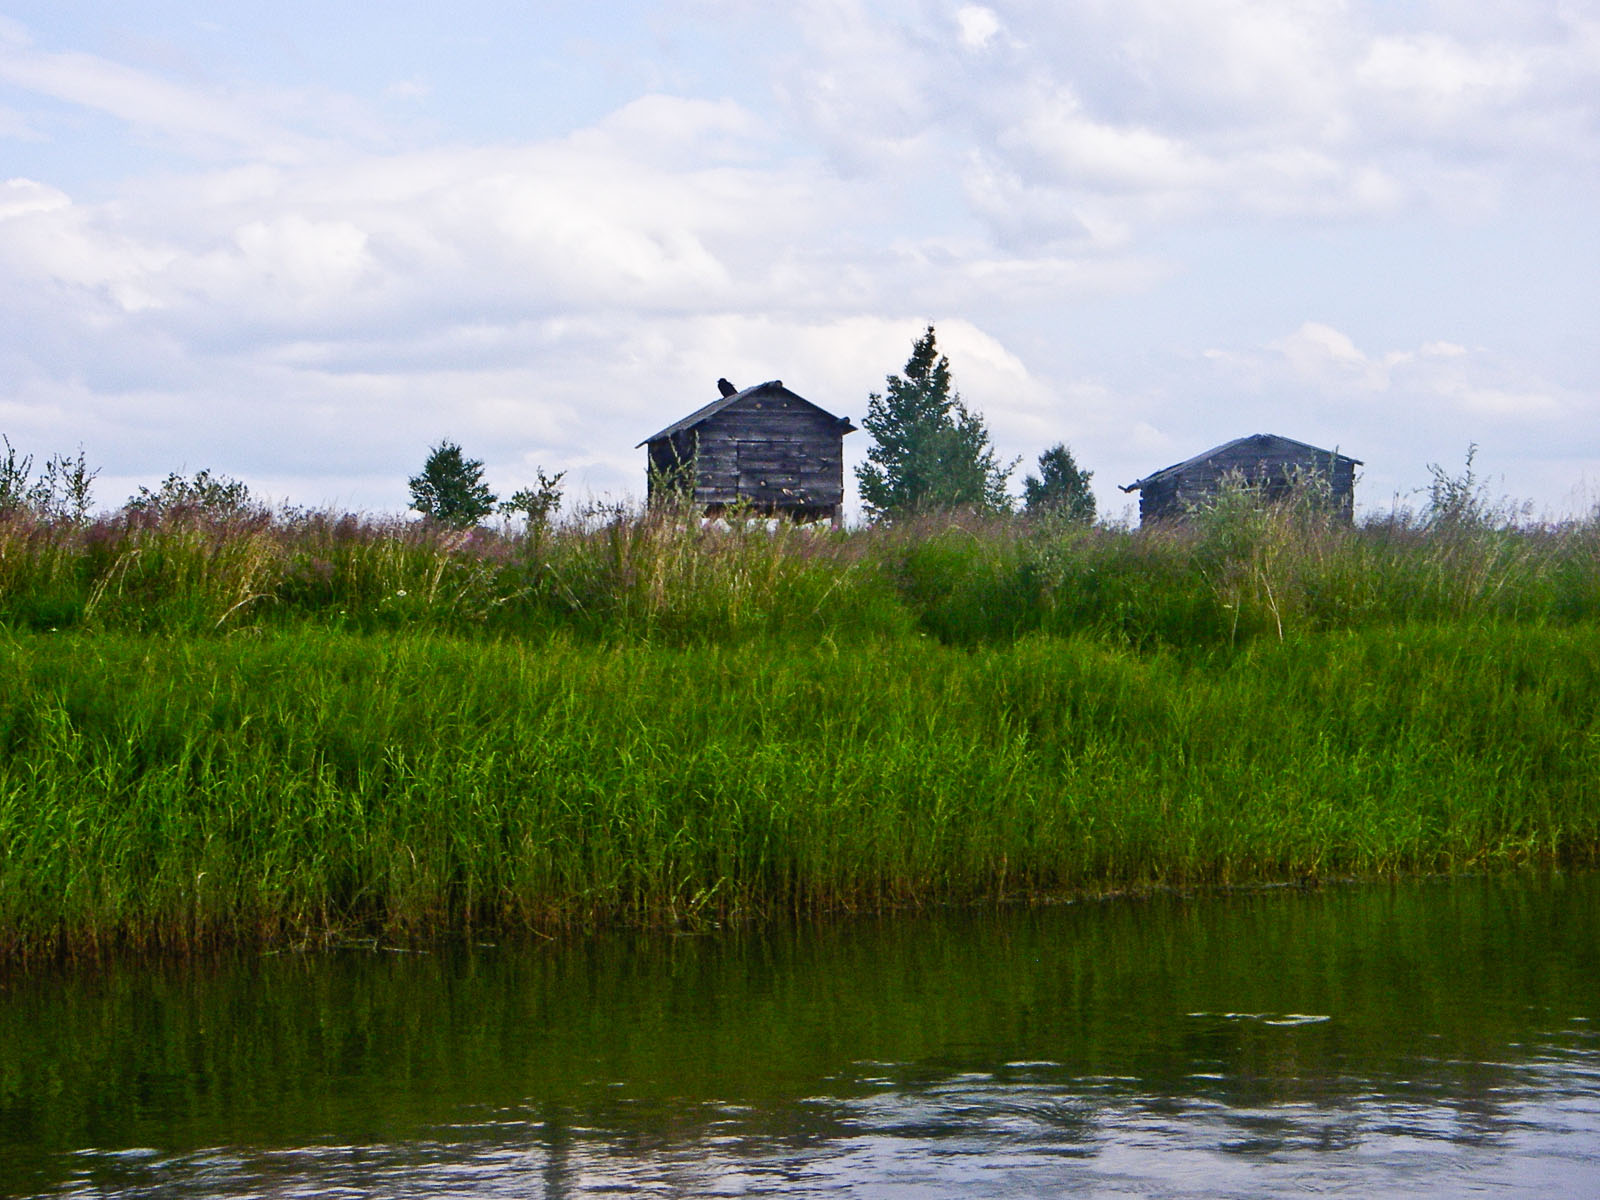 These caches are used by Alaskan natives to store supplies for pike-harvesting season in this network of sloughs and lakes.  That's a raven on top of the left one. From Minto Flats in Alaska.